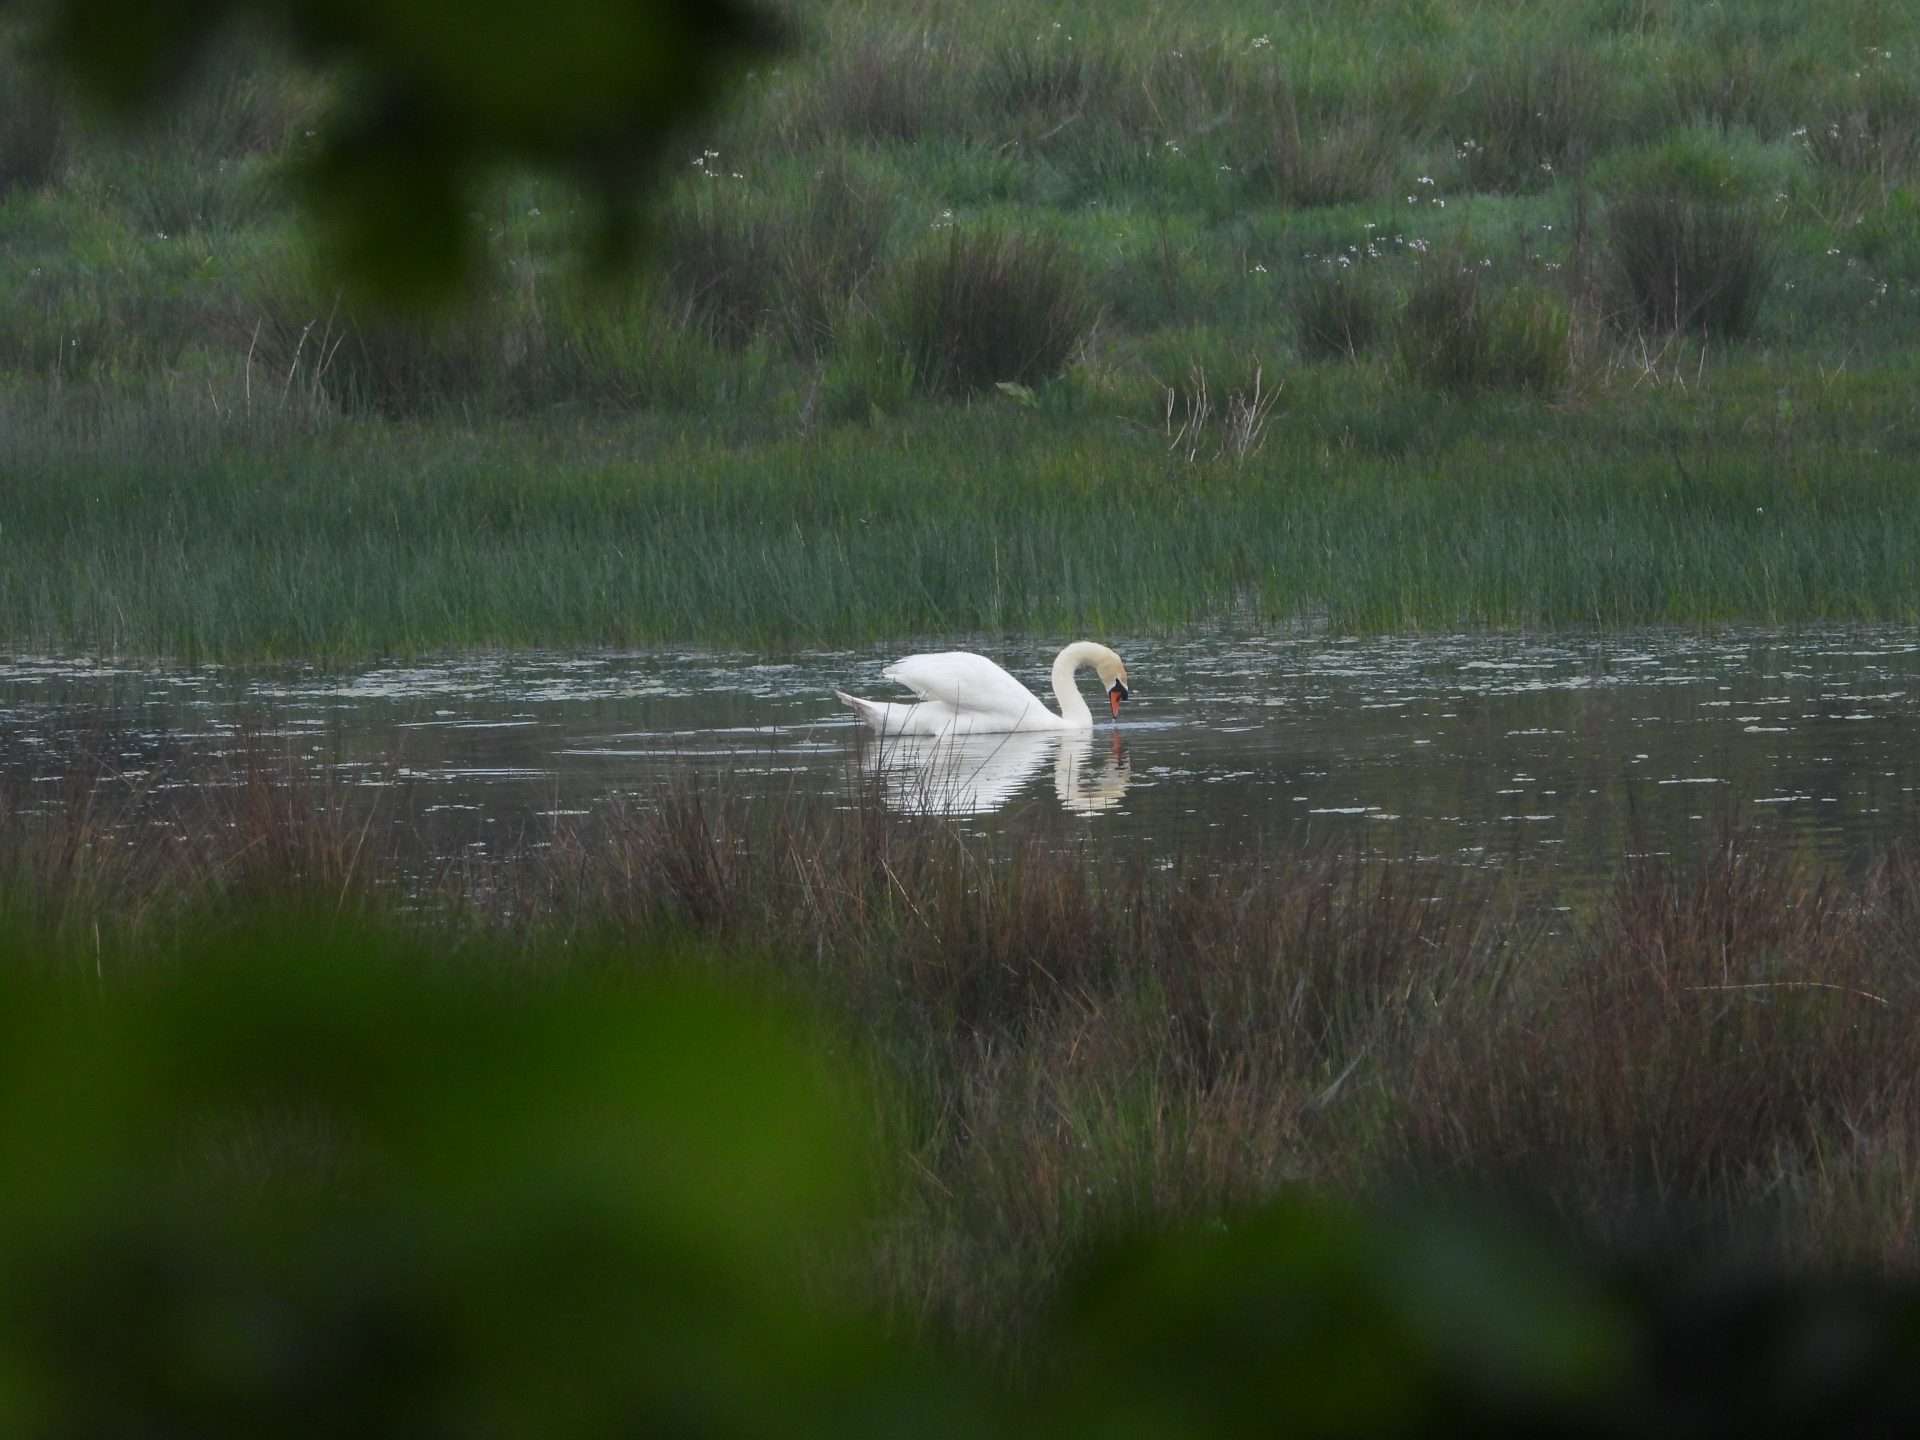 Mute Swan by Kenneth Bradley at Exminster marshes RSPB